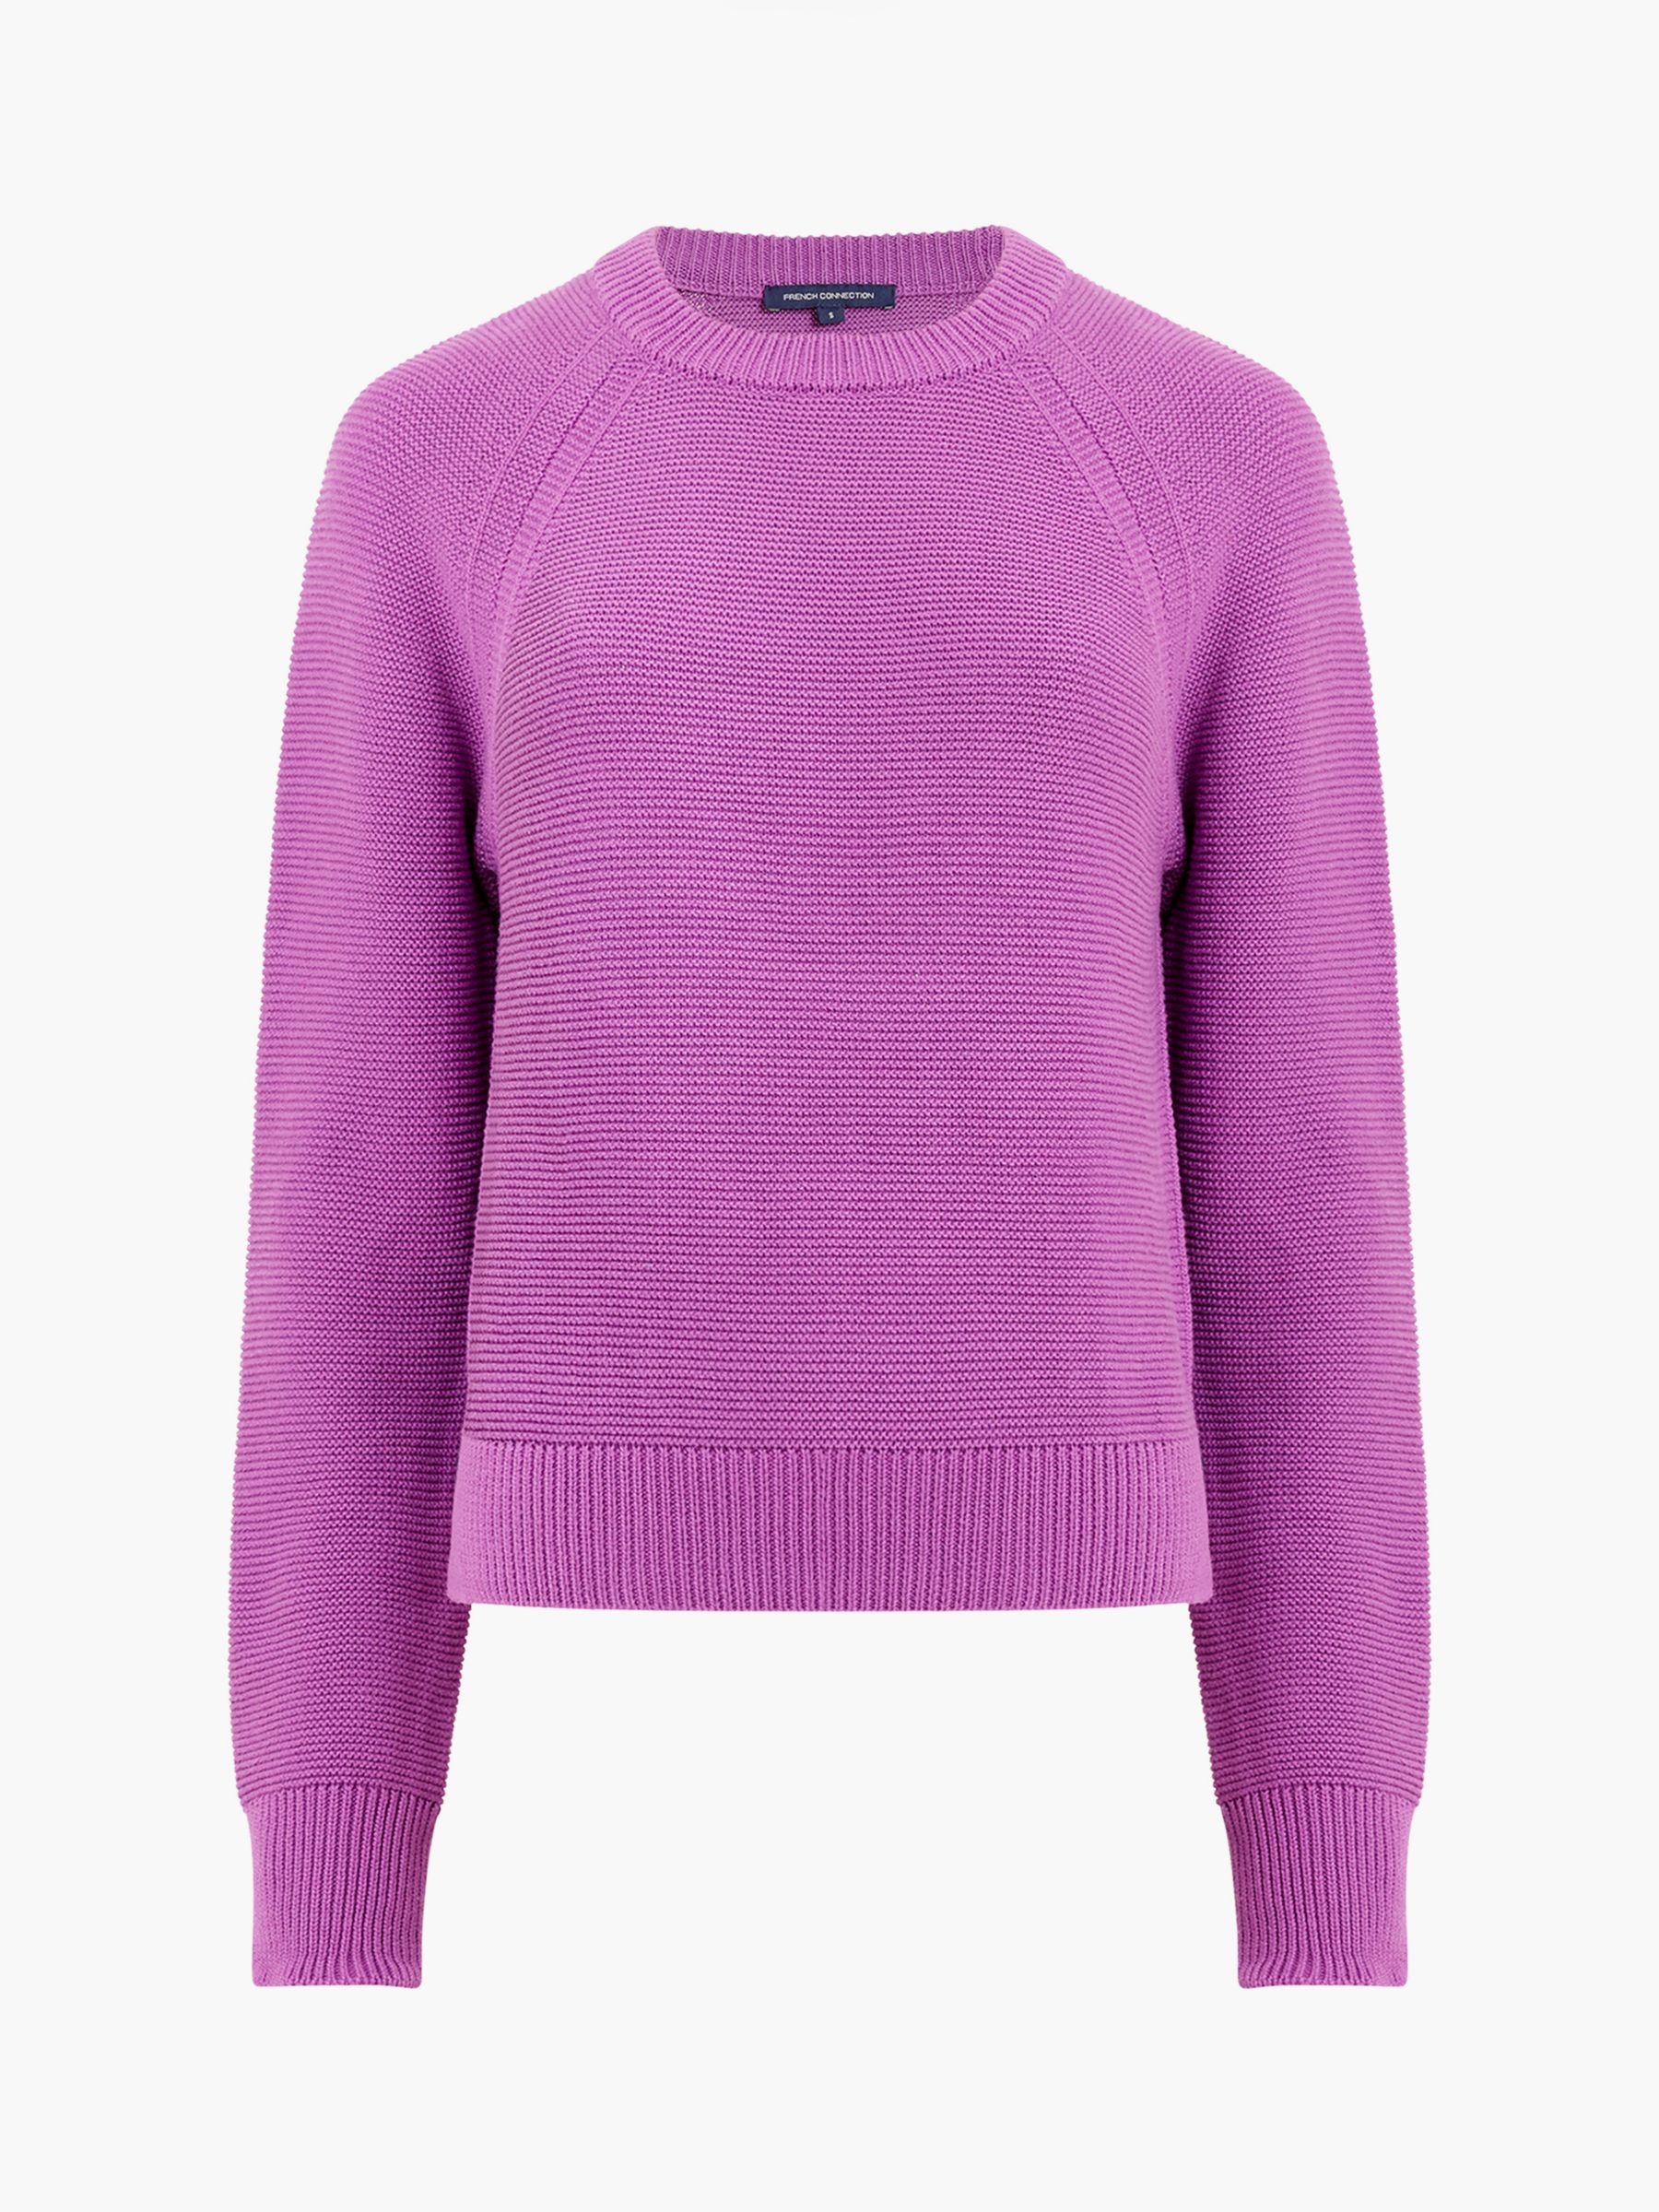 Buy French Connection Lilly Crew Jumper Online at johnlewis.com